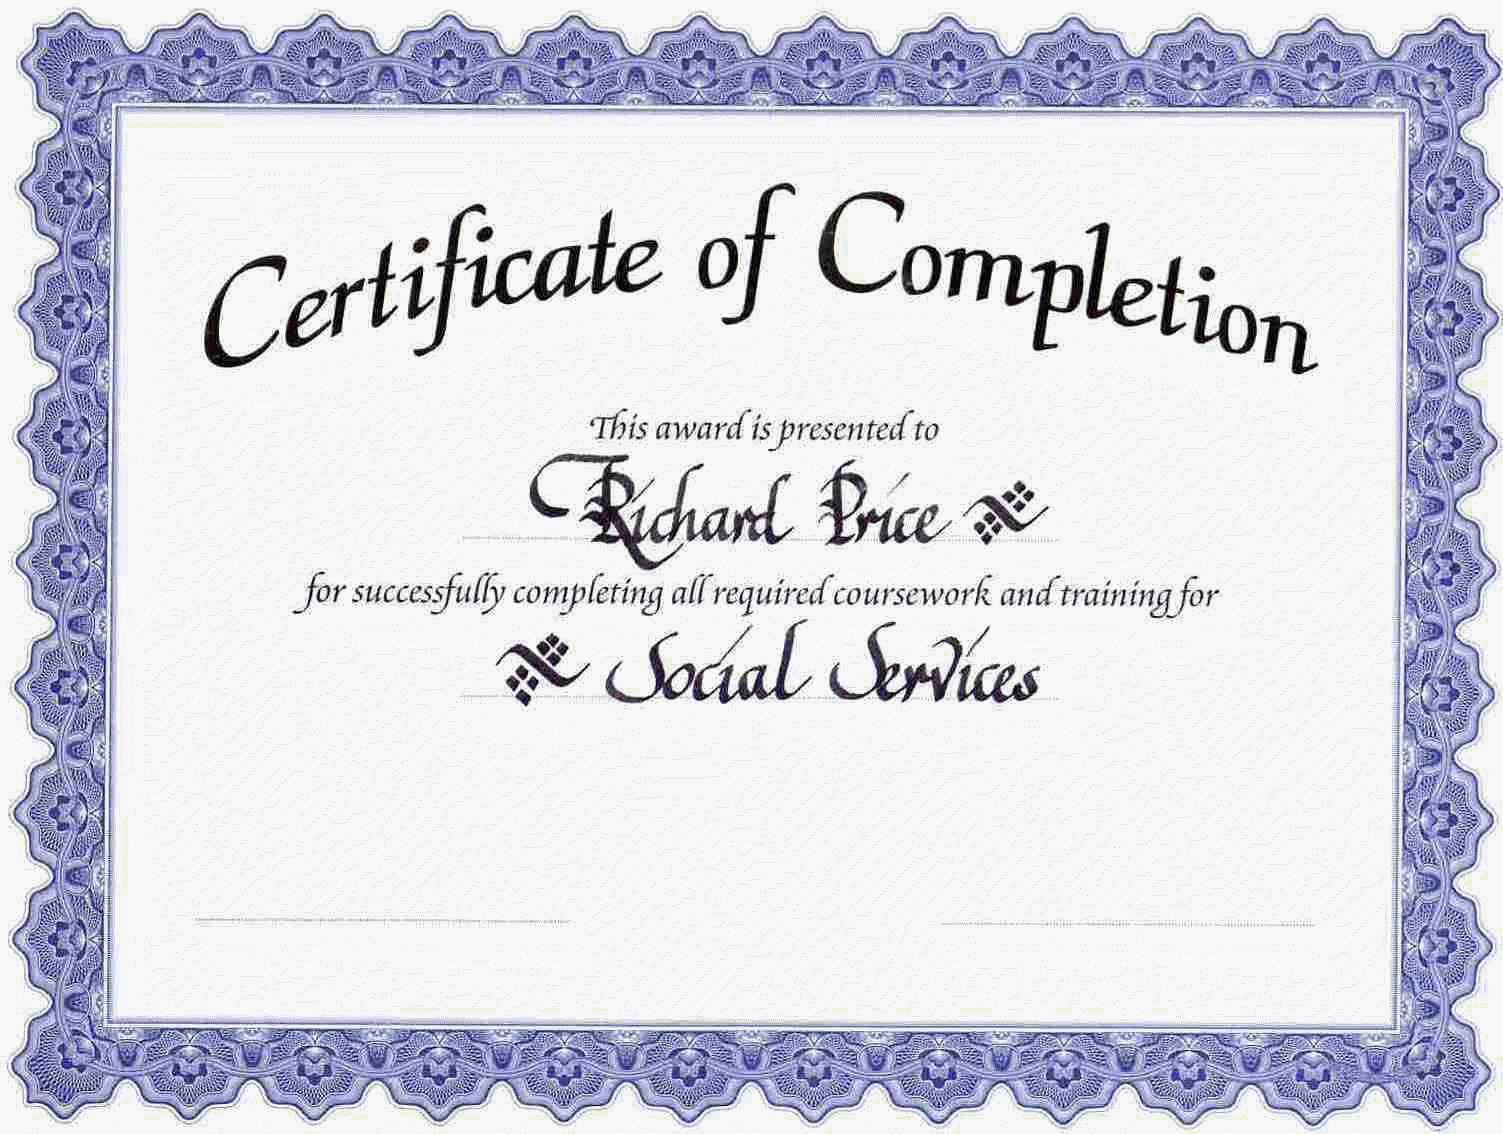 The Best Printable Certificate Of Completion | Katrina Blog In Certificate Of Completion Template Free Printable